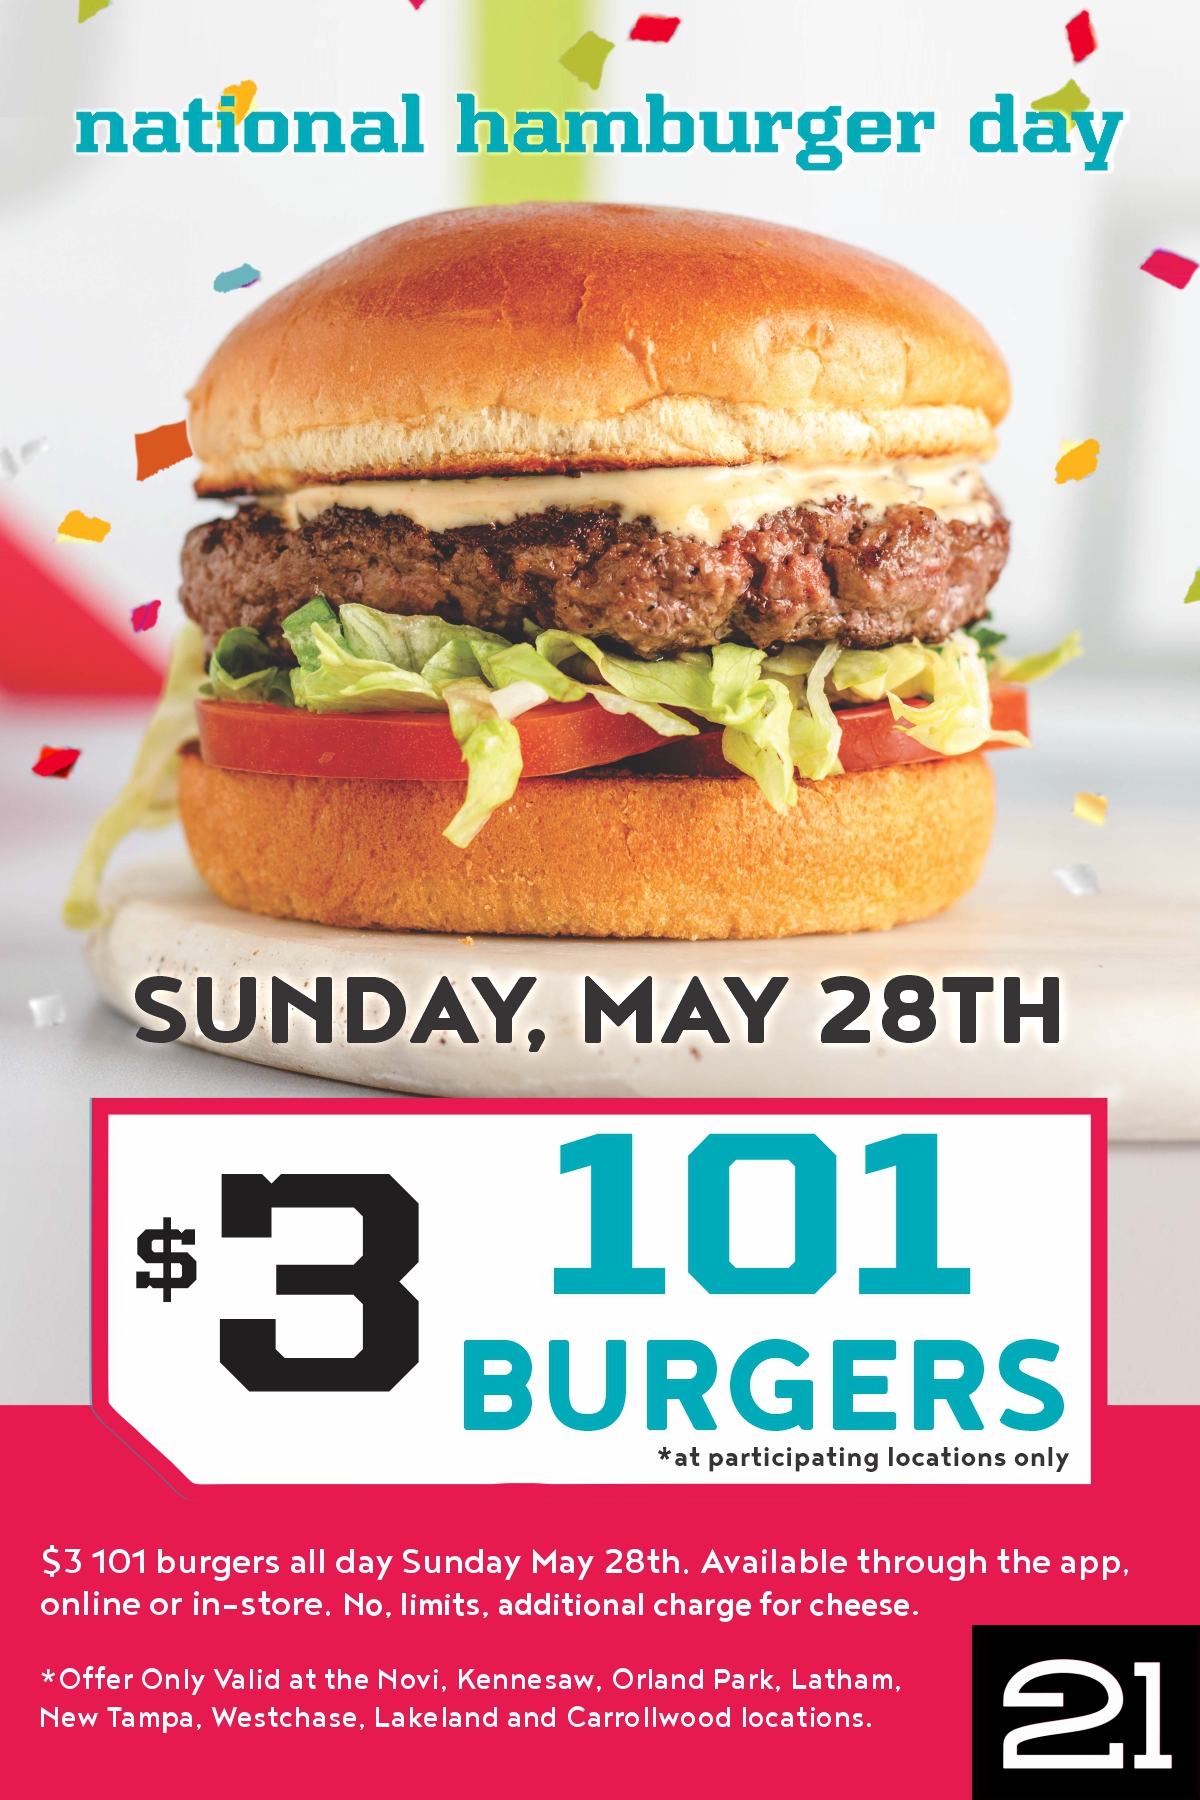 National Hamburger Day is May 28th- Celebrate with $3 101 Burgers at participating locations.